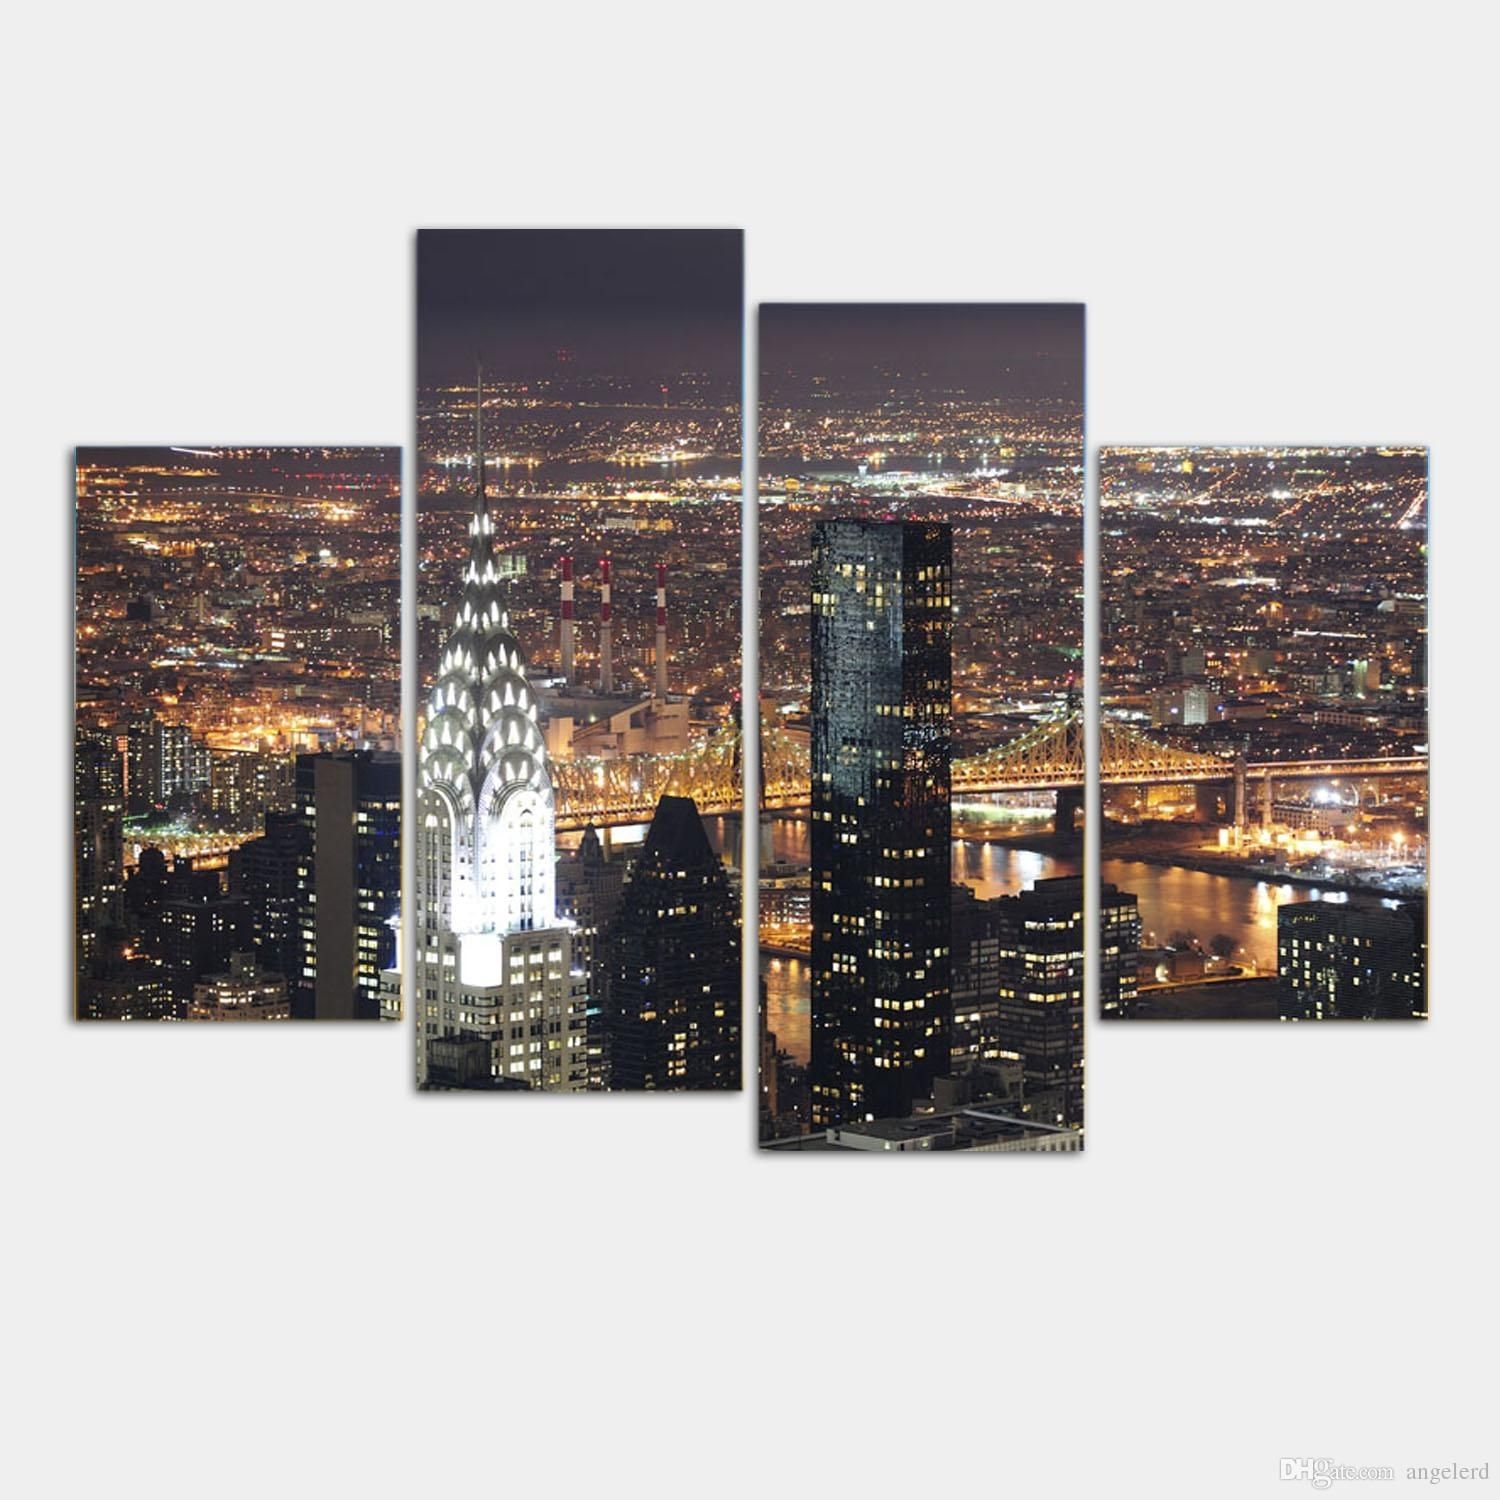 Discount Wall Art New York City Manhattan Usa With Lights In Nice For New York Wall Art (View 7 of 20)